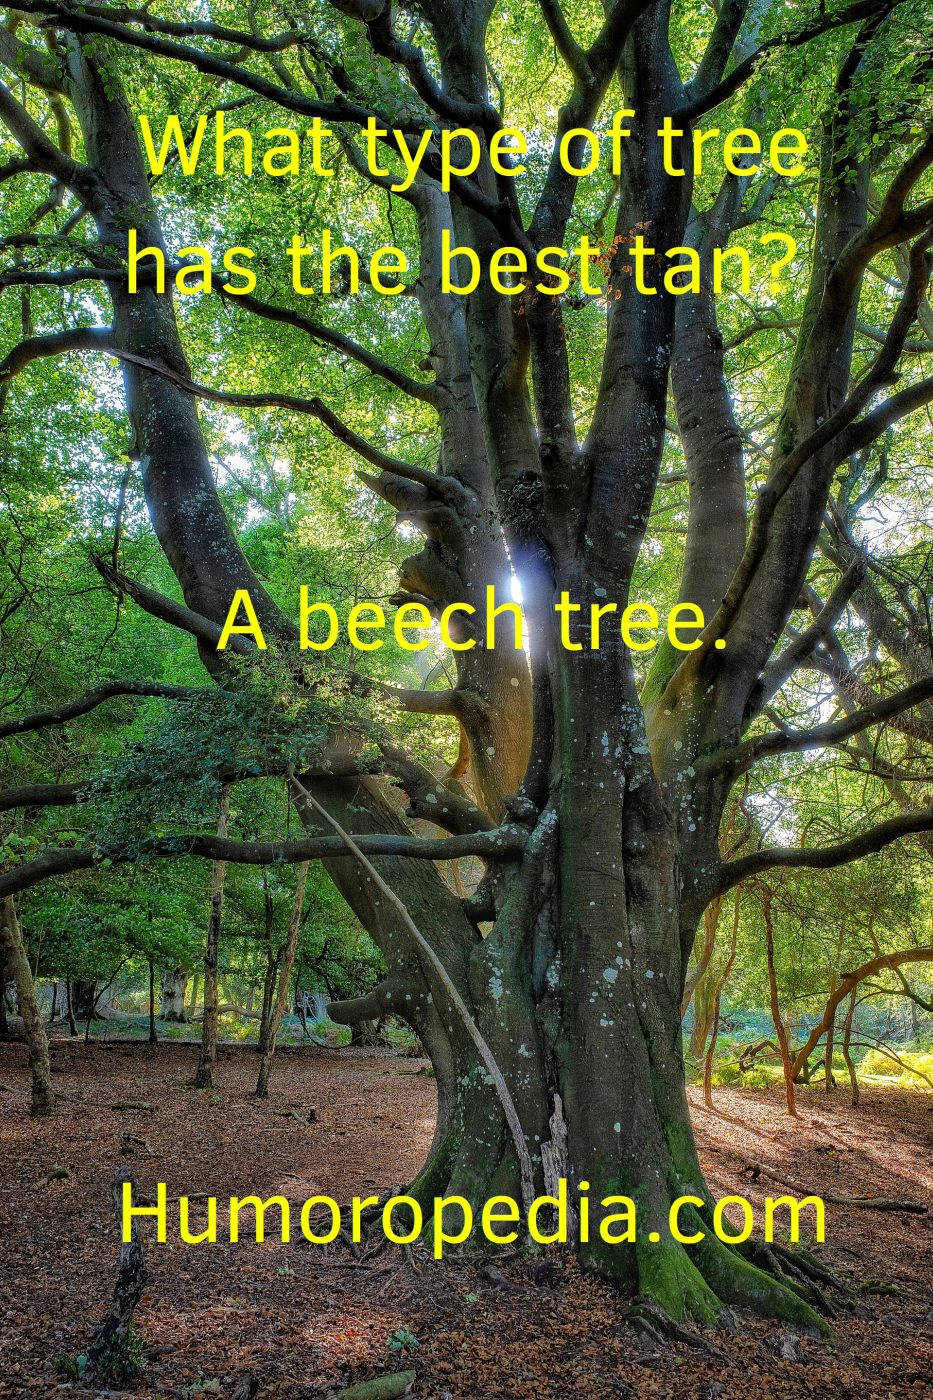 Tree Play On Words About The Best Tan